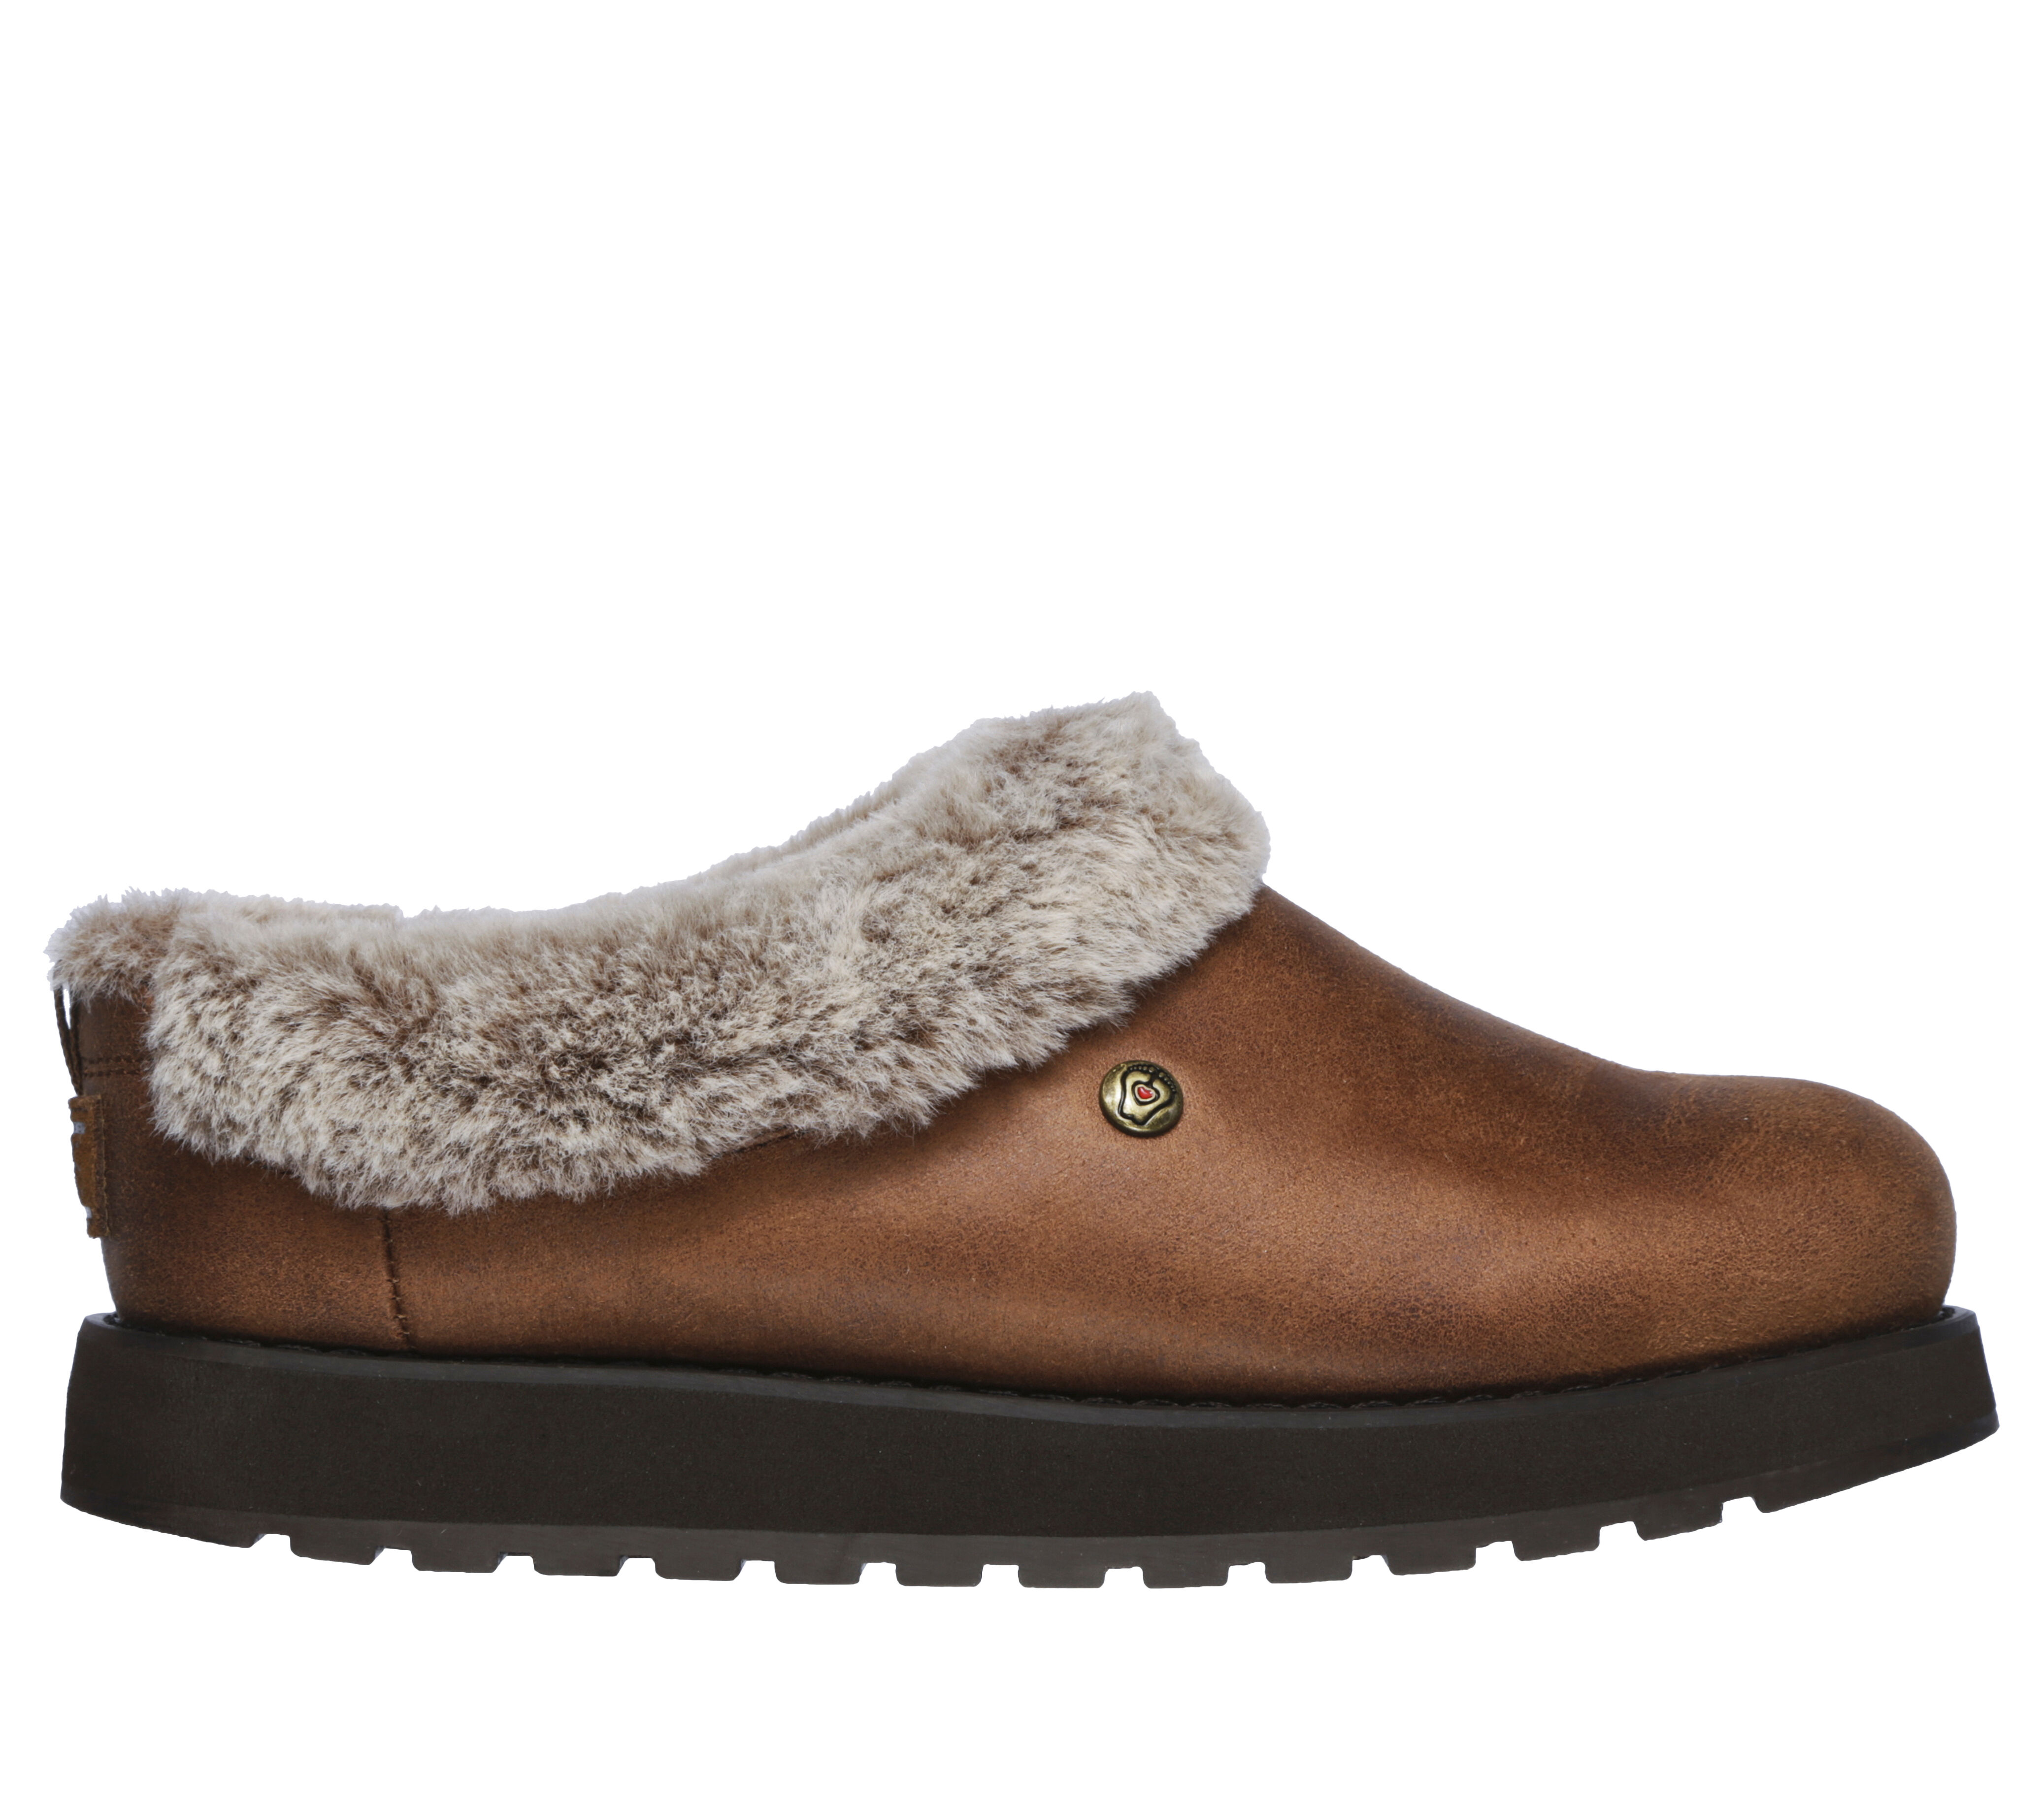 skechers bobs slippers canada